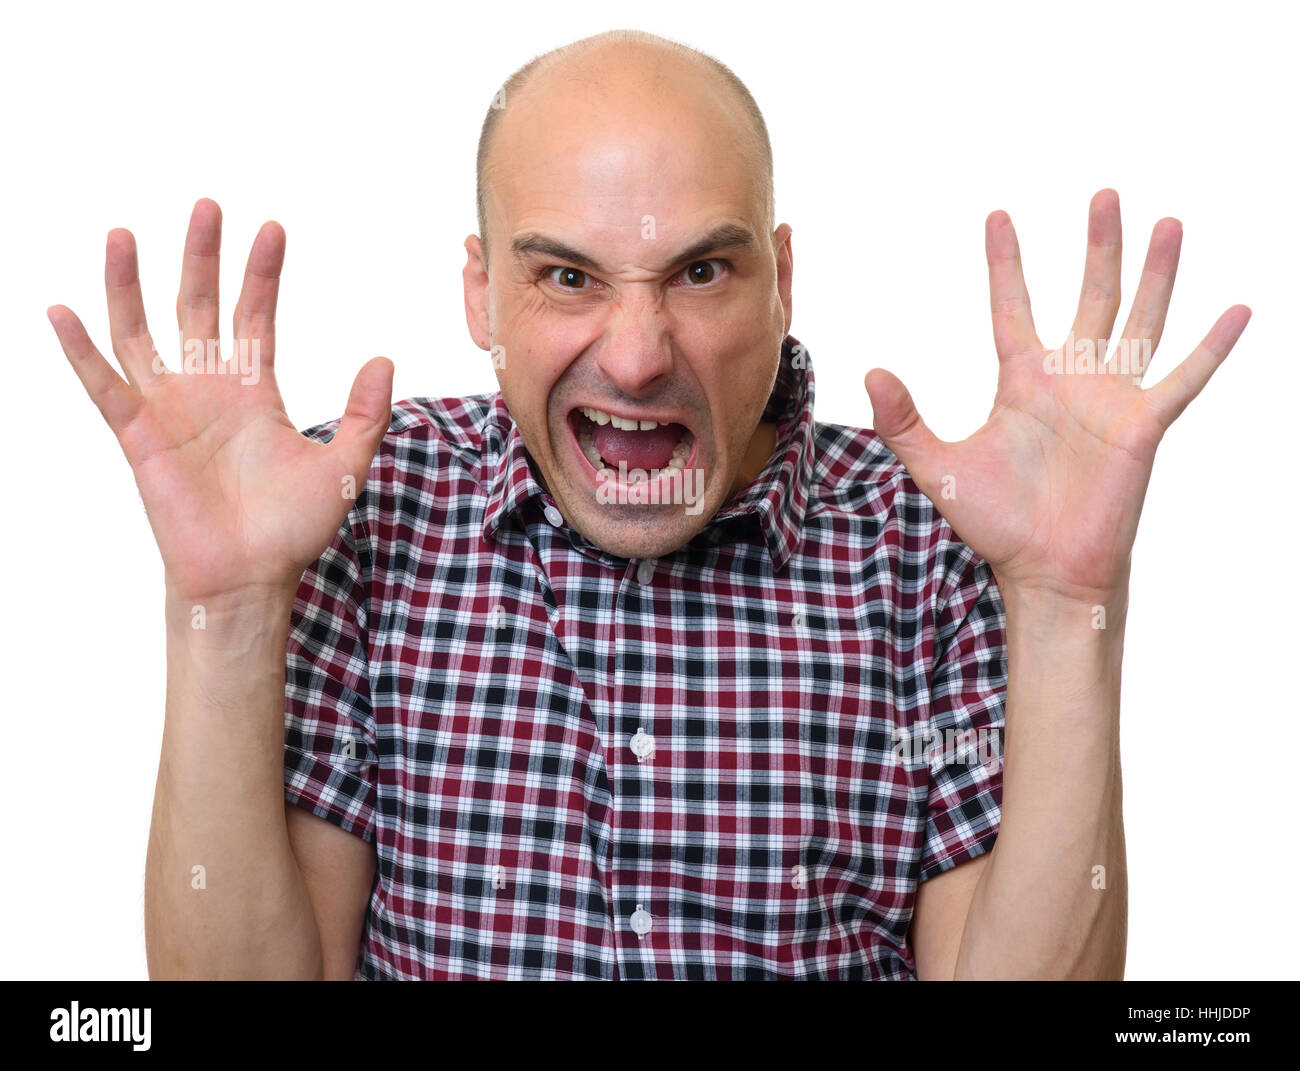 angry bizarre dude looking at camera. Isolated on white background Stock Photo